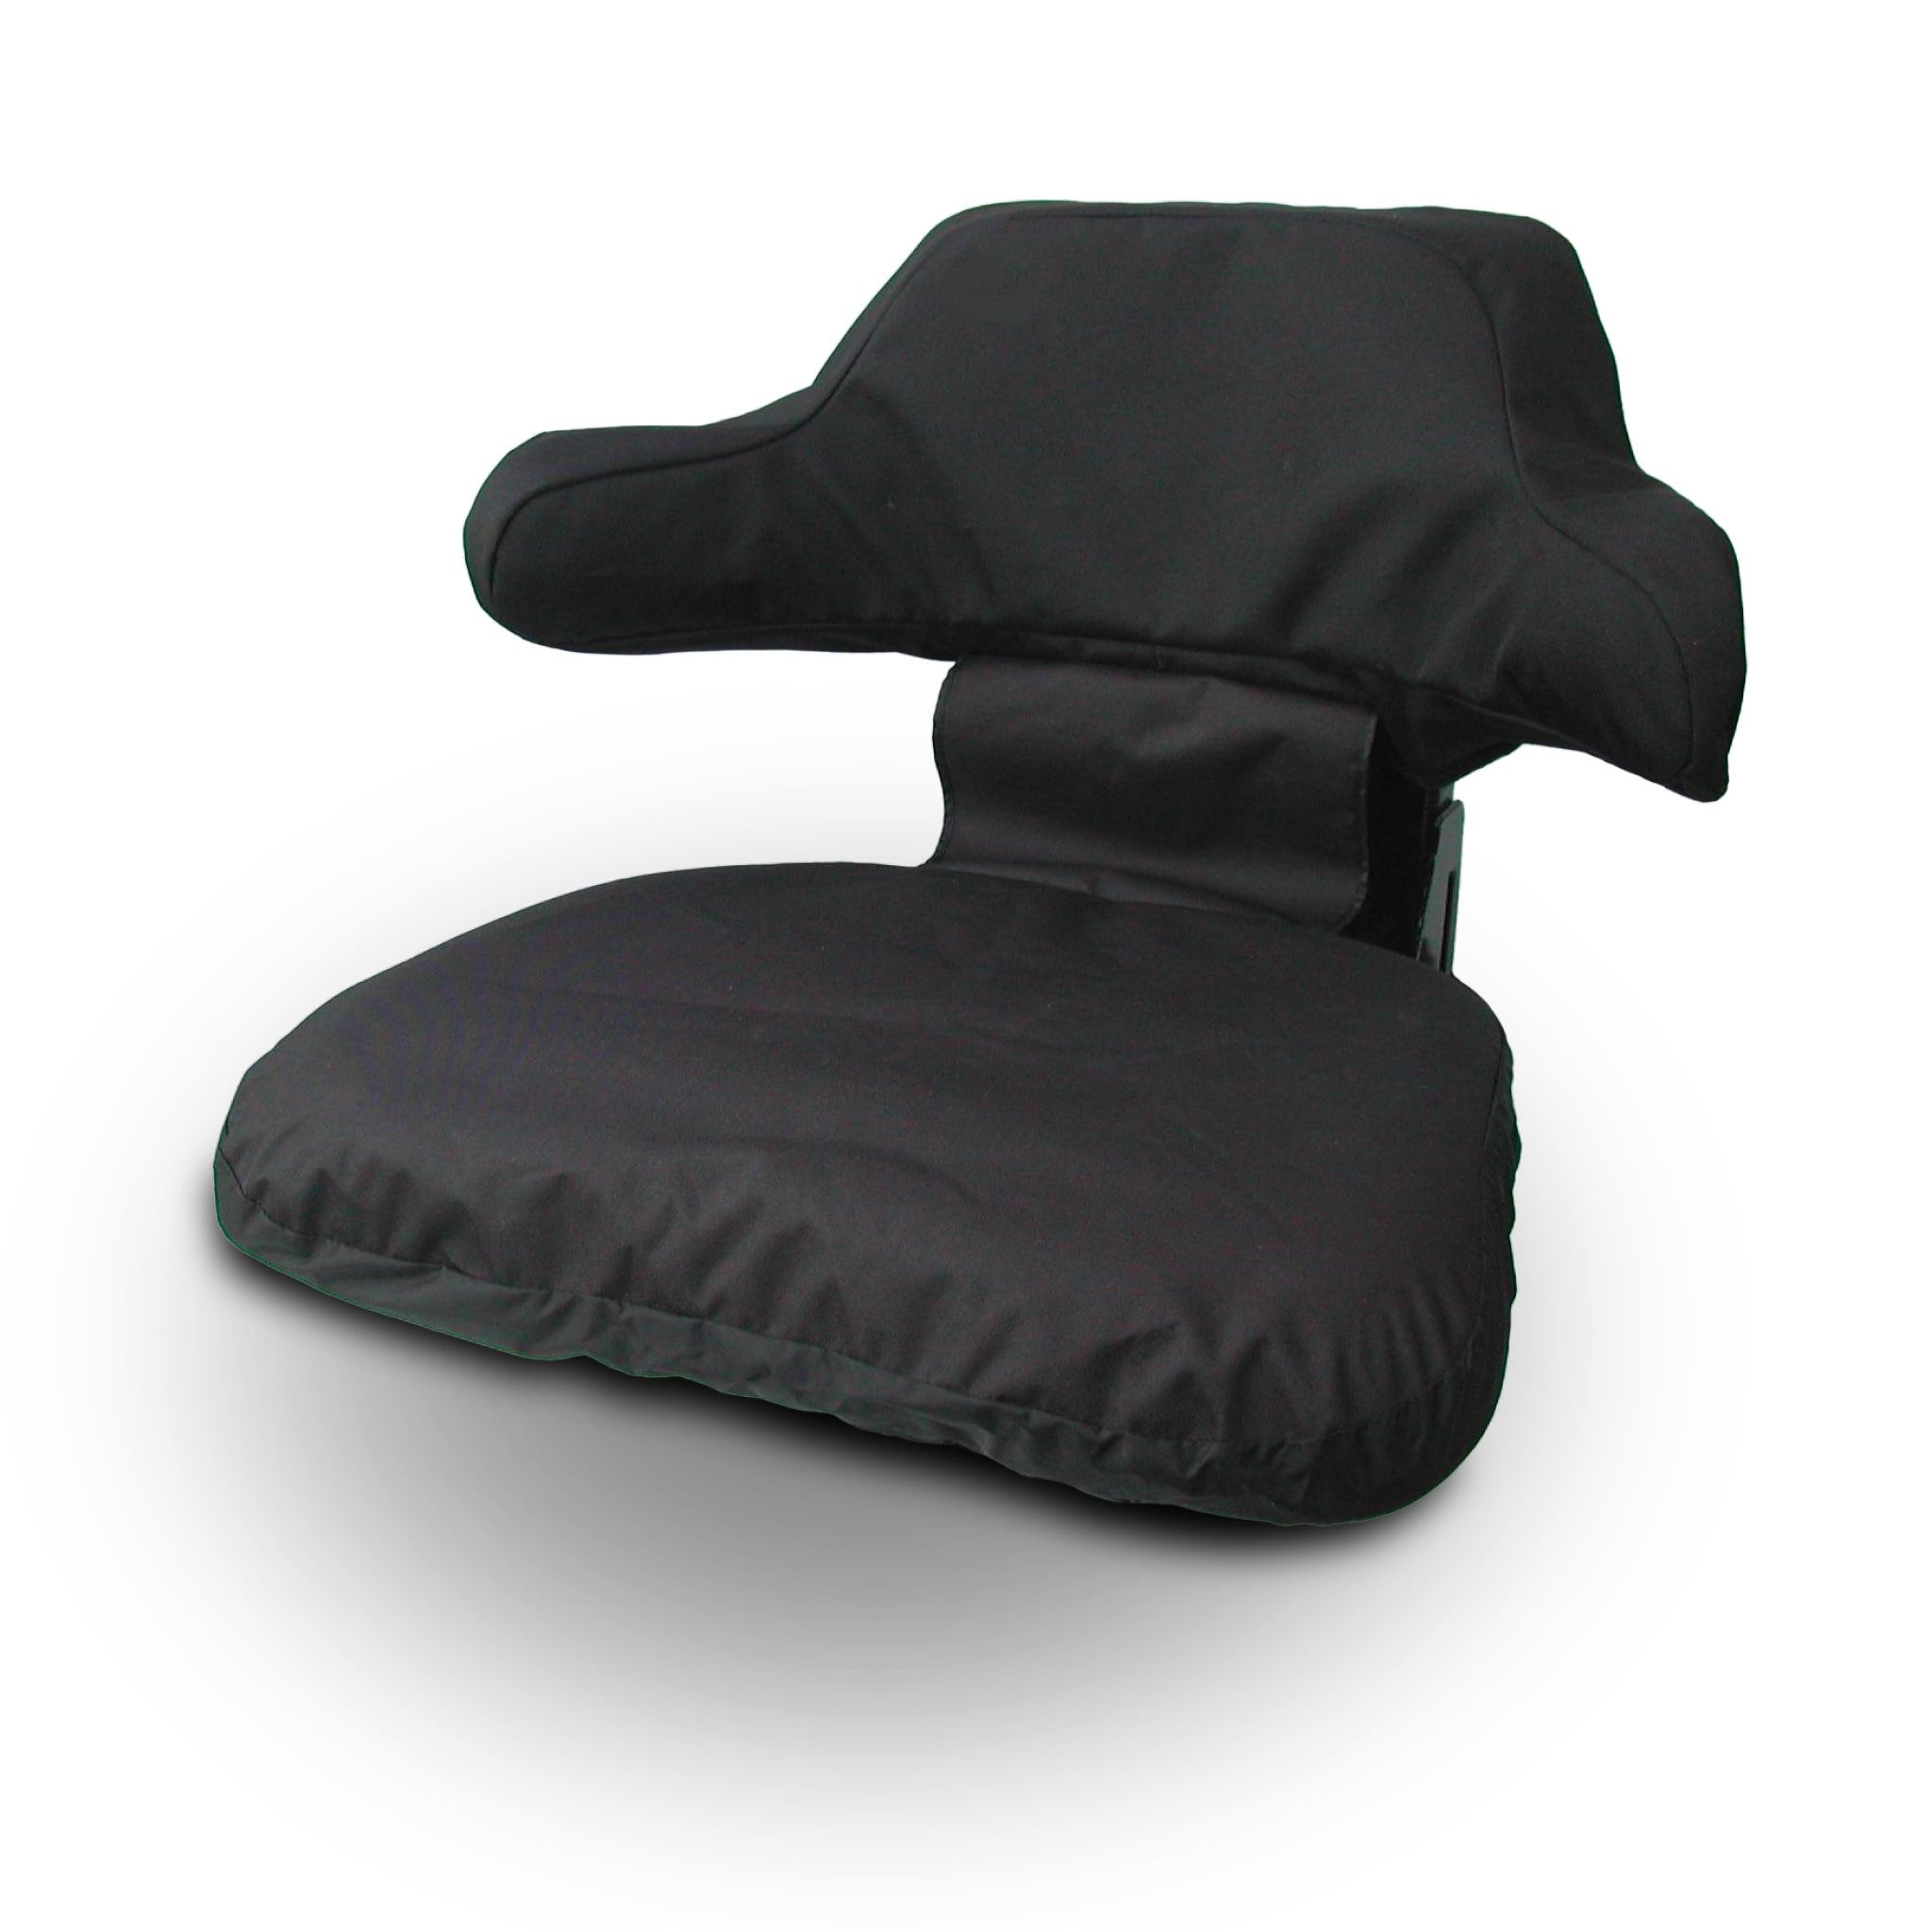 Wrap-around Tractor Seat Cover